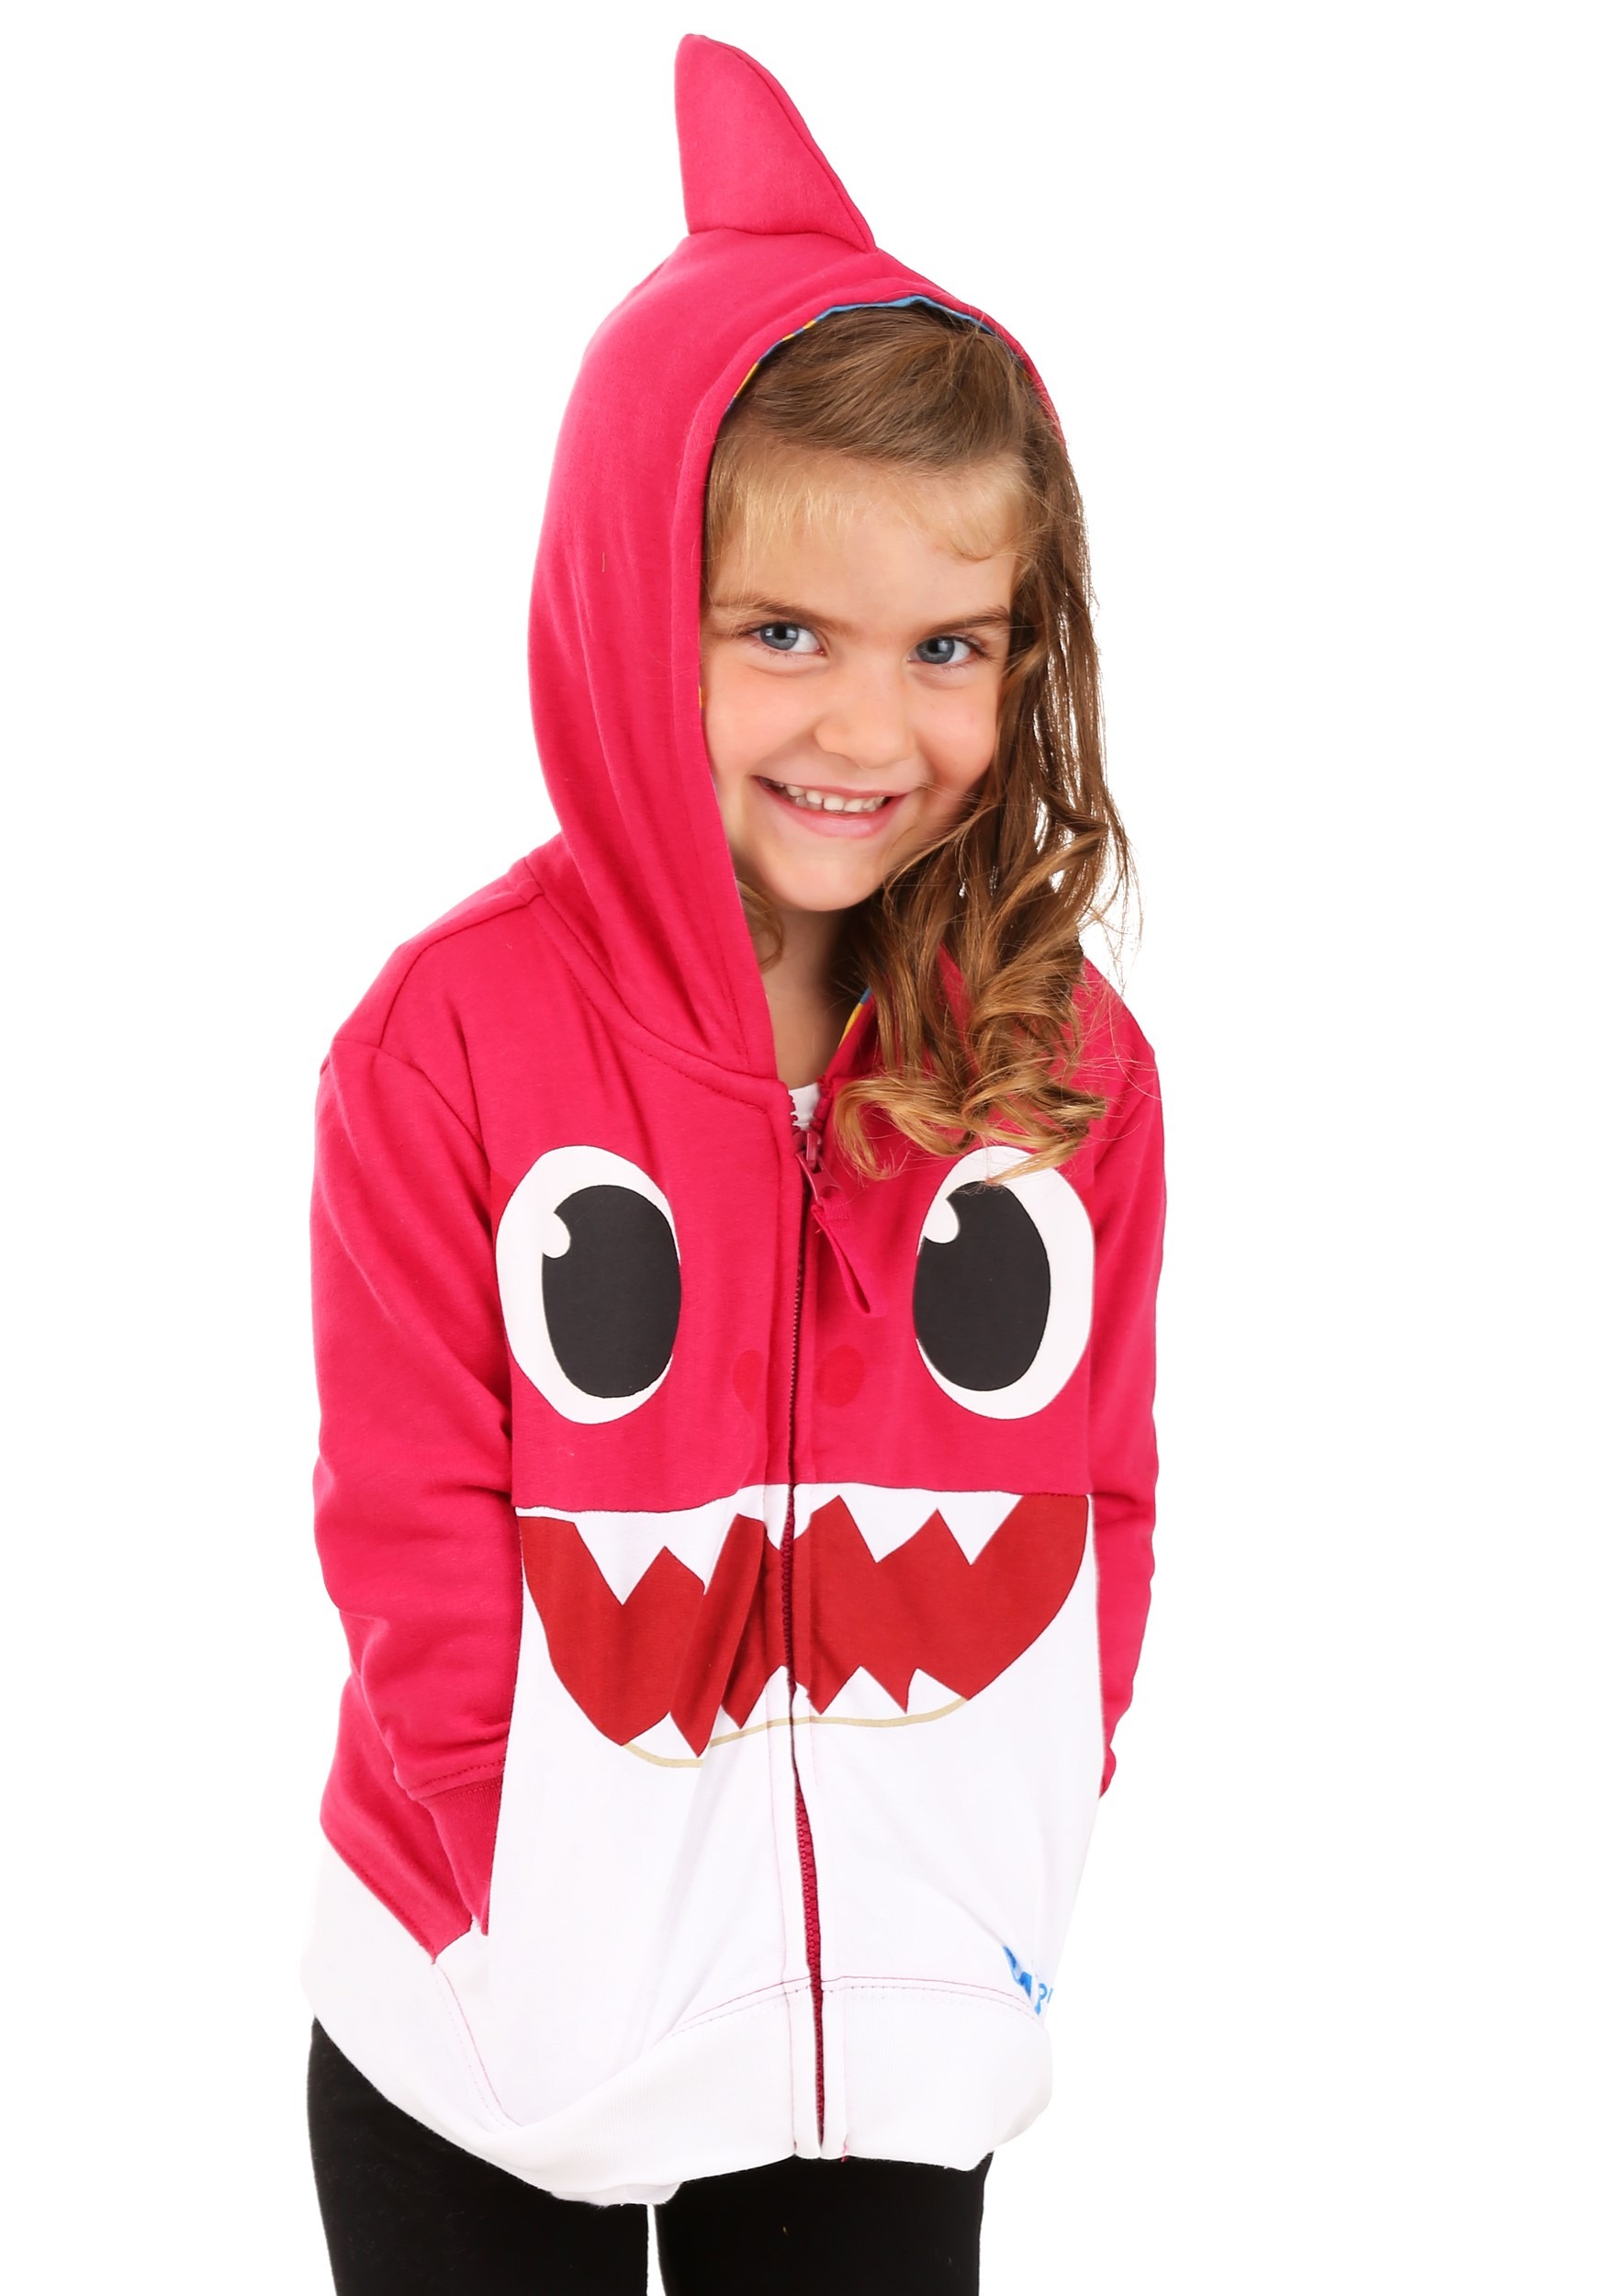 https://images.fun.com/products/68800/1-1/toddler-pink-baby-shark-costume-hoodie-update.jpg